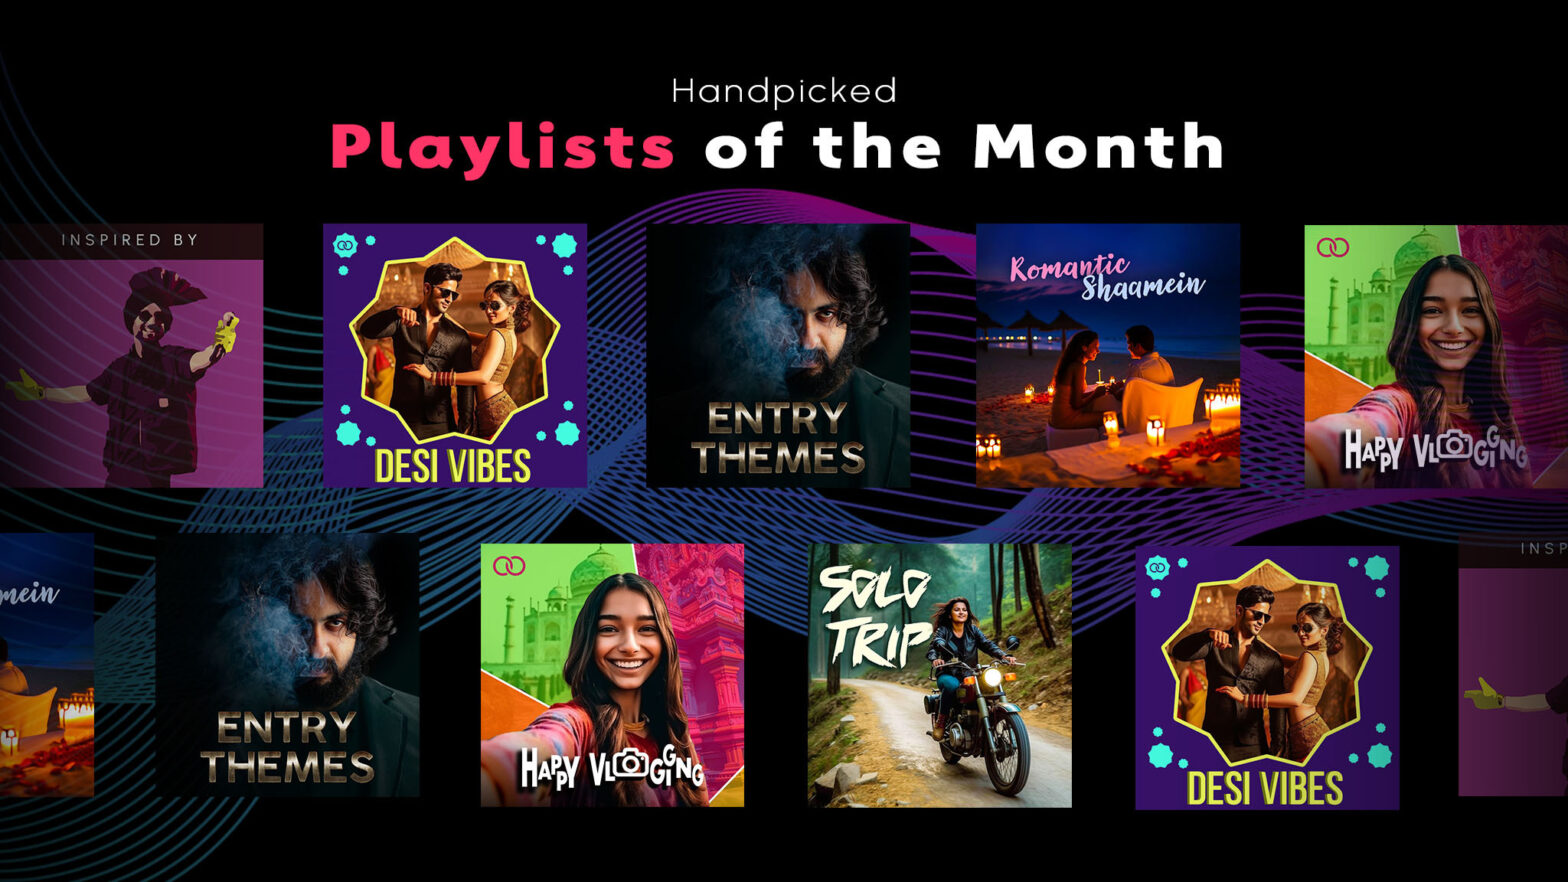 Handpicked Playlists of the Month June